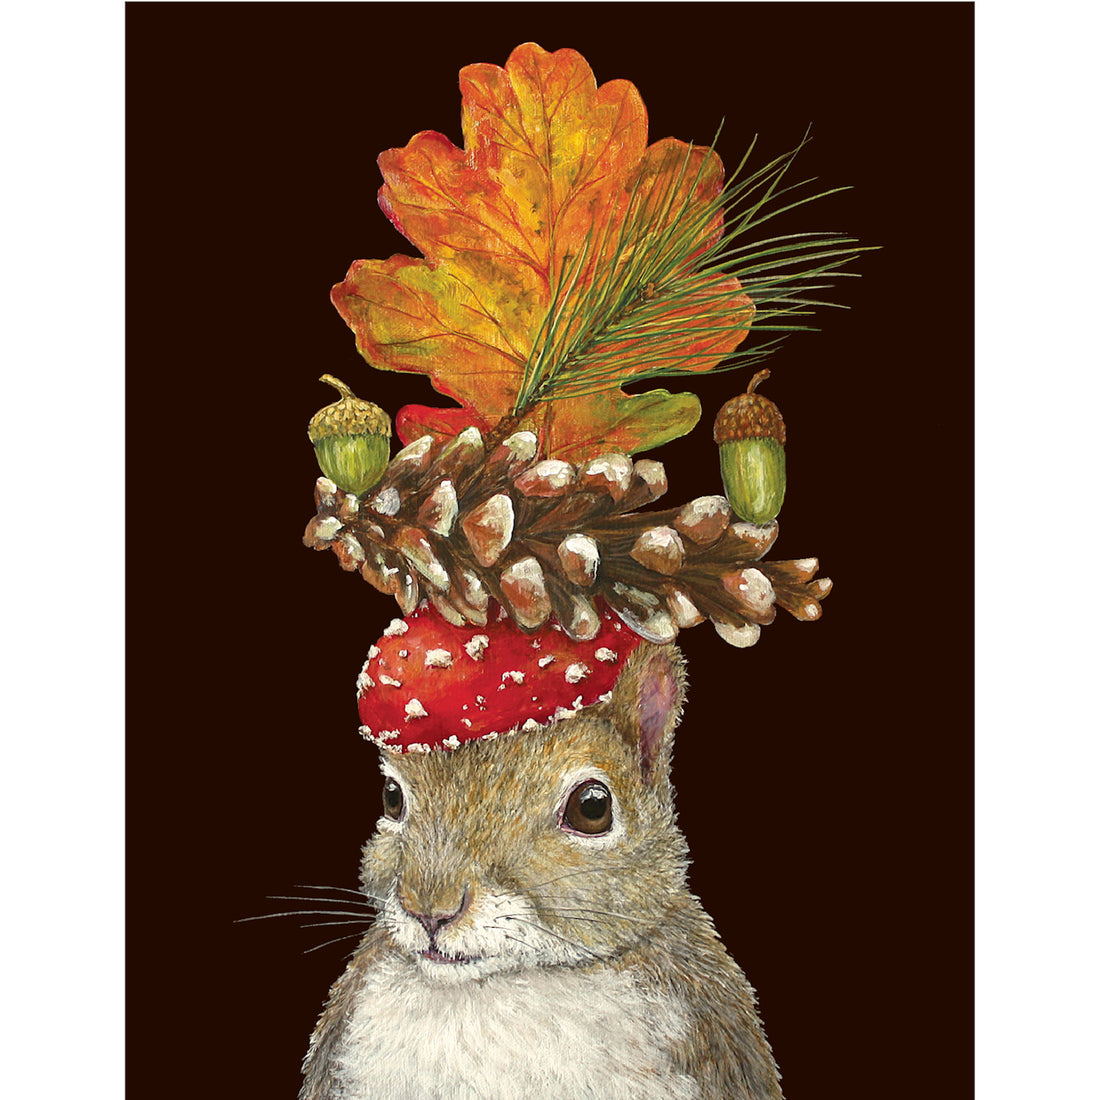 A Hester &amp; Cook Autumn Squirrel Card featuring a squirrel wearing a hat adorned with leaves and pine cones.